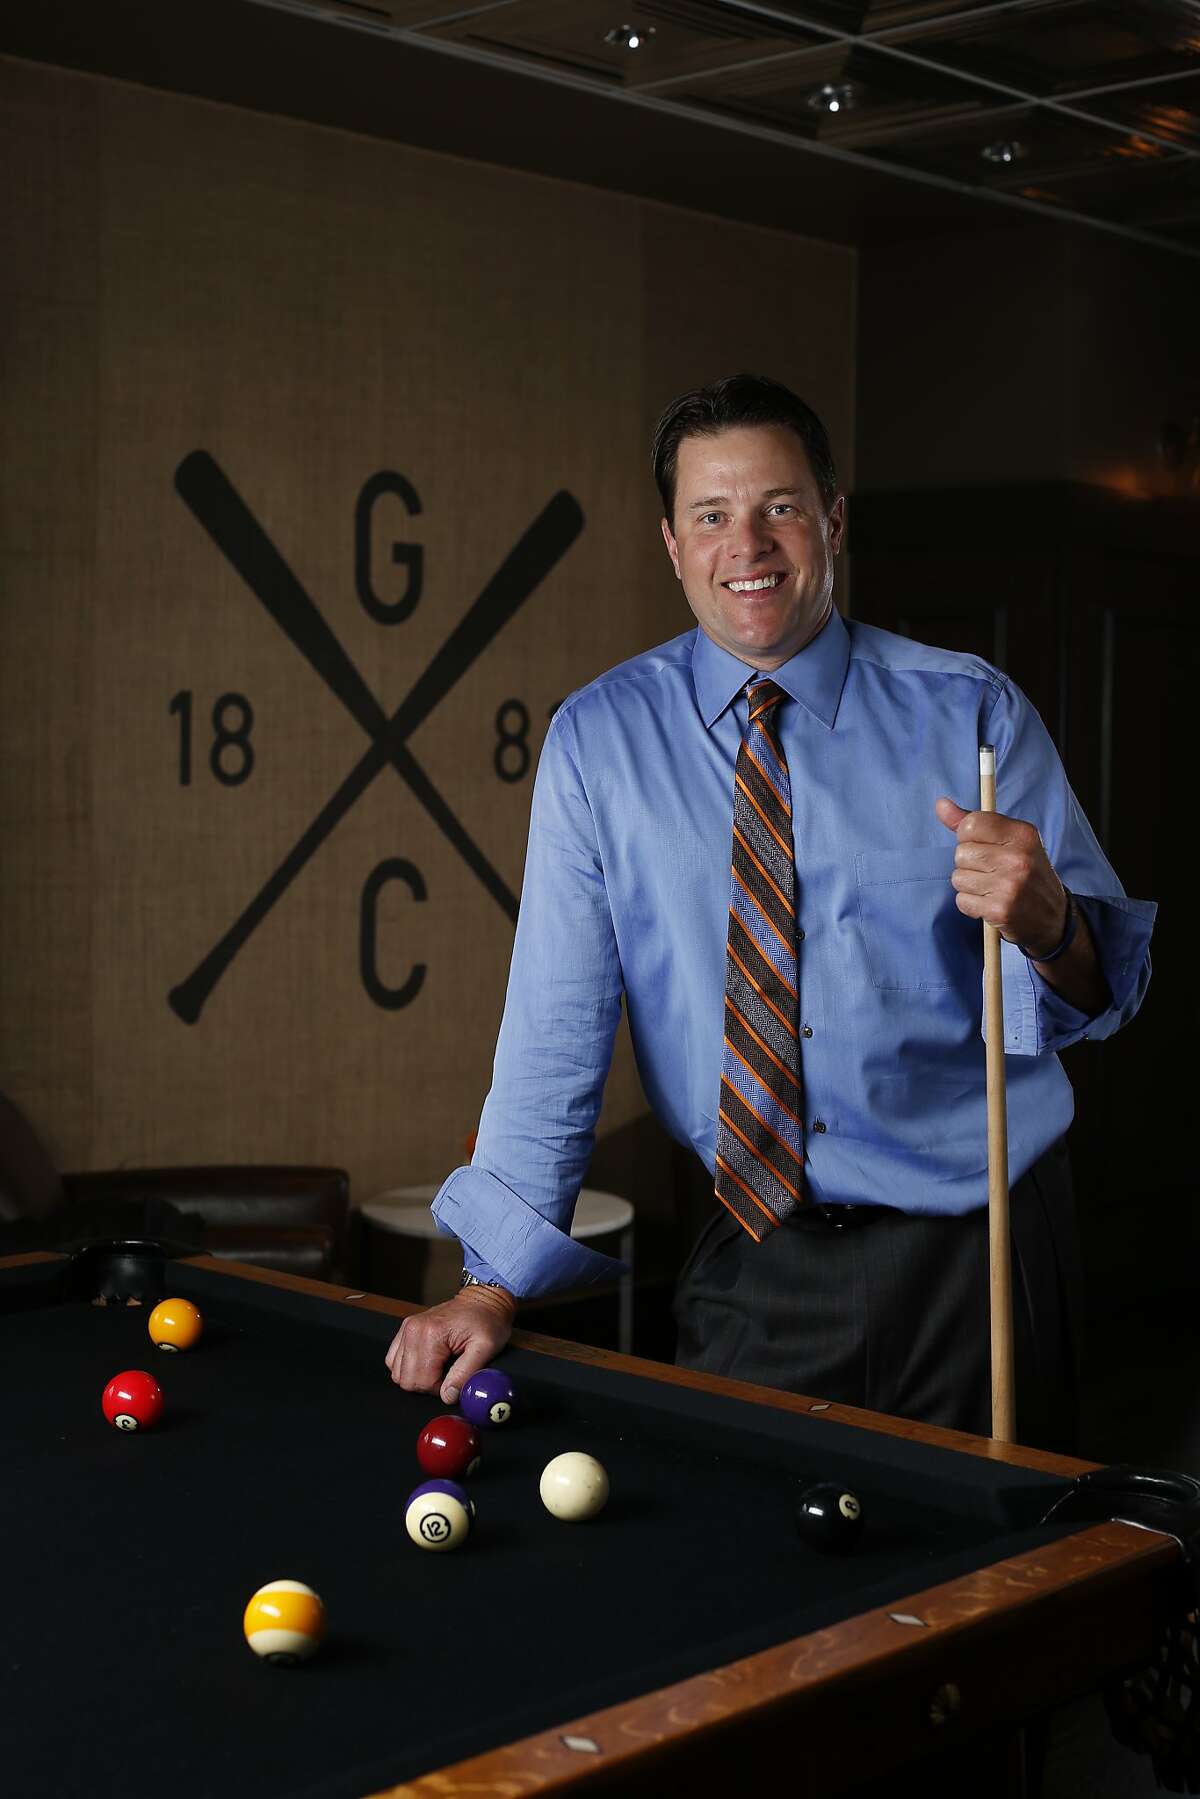 Former San Francisco Giants player JT Snow stands for a portrait at The Gotham Club, a new members-only club inside AT&T Park named after the original team that eventually became the Giants in San Francisco, Calif. on Tuesday, March 25, 2014.